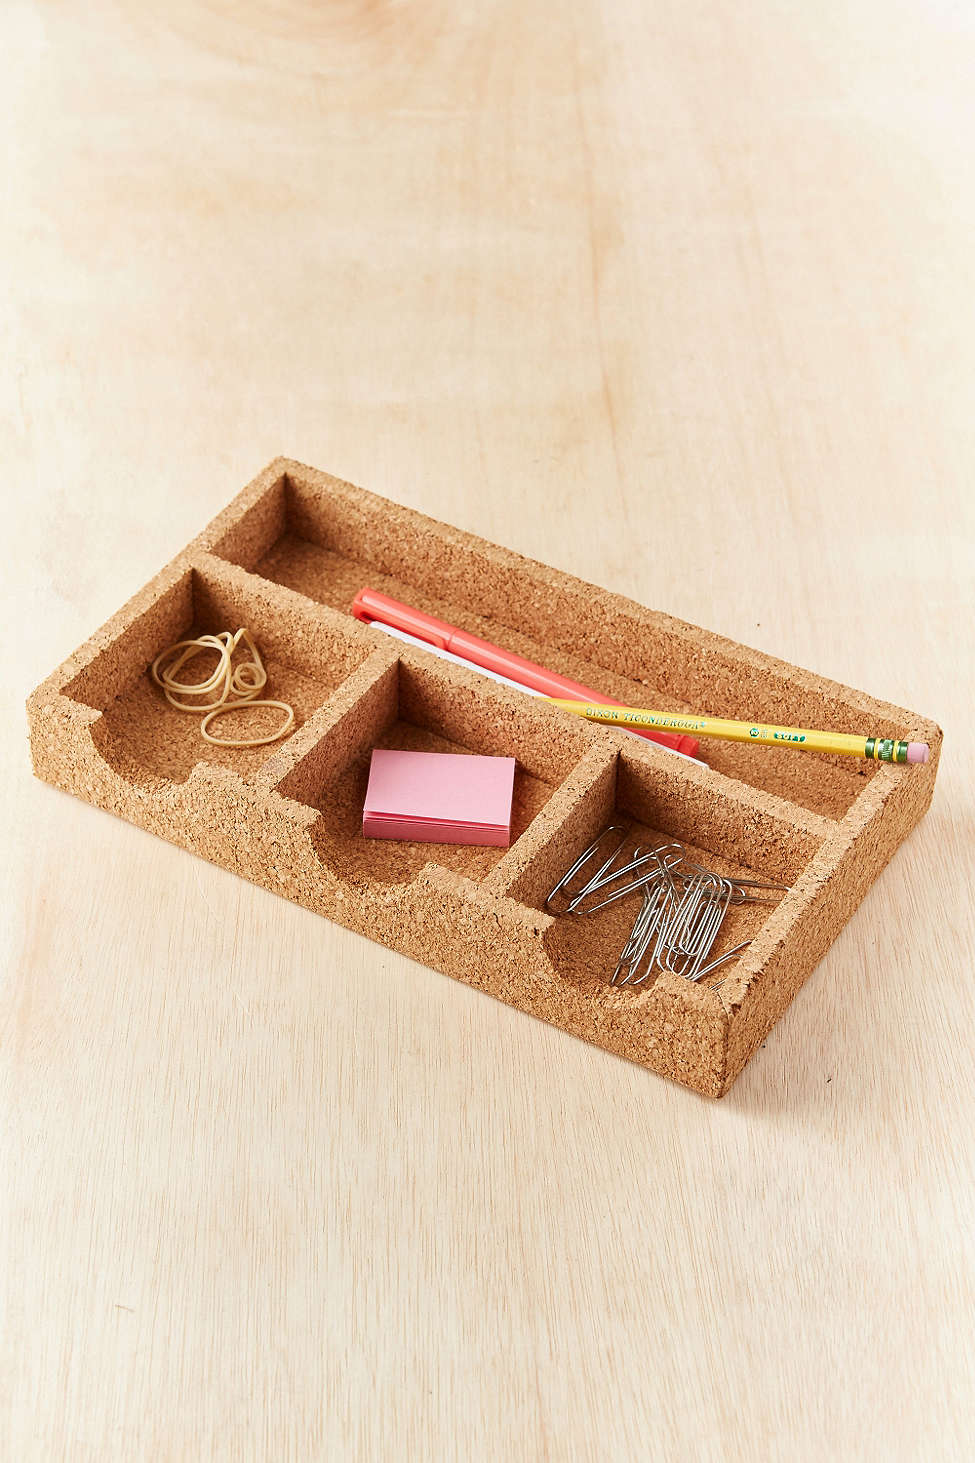 Cork desk tray from Urban Outfitters